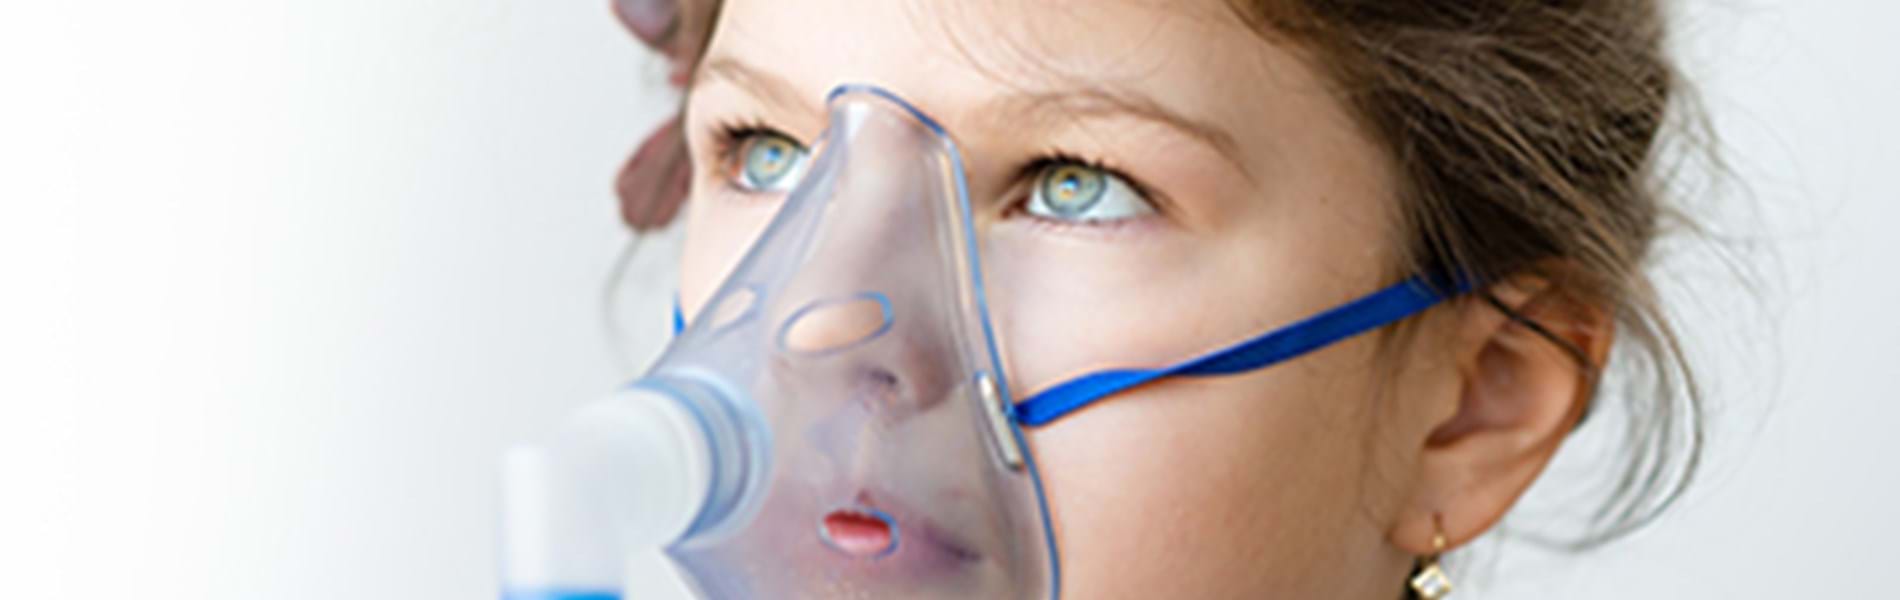 Tackling toxic emissions from respiratory medical devices: ISO 10993 and how to prepare